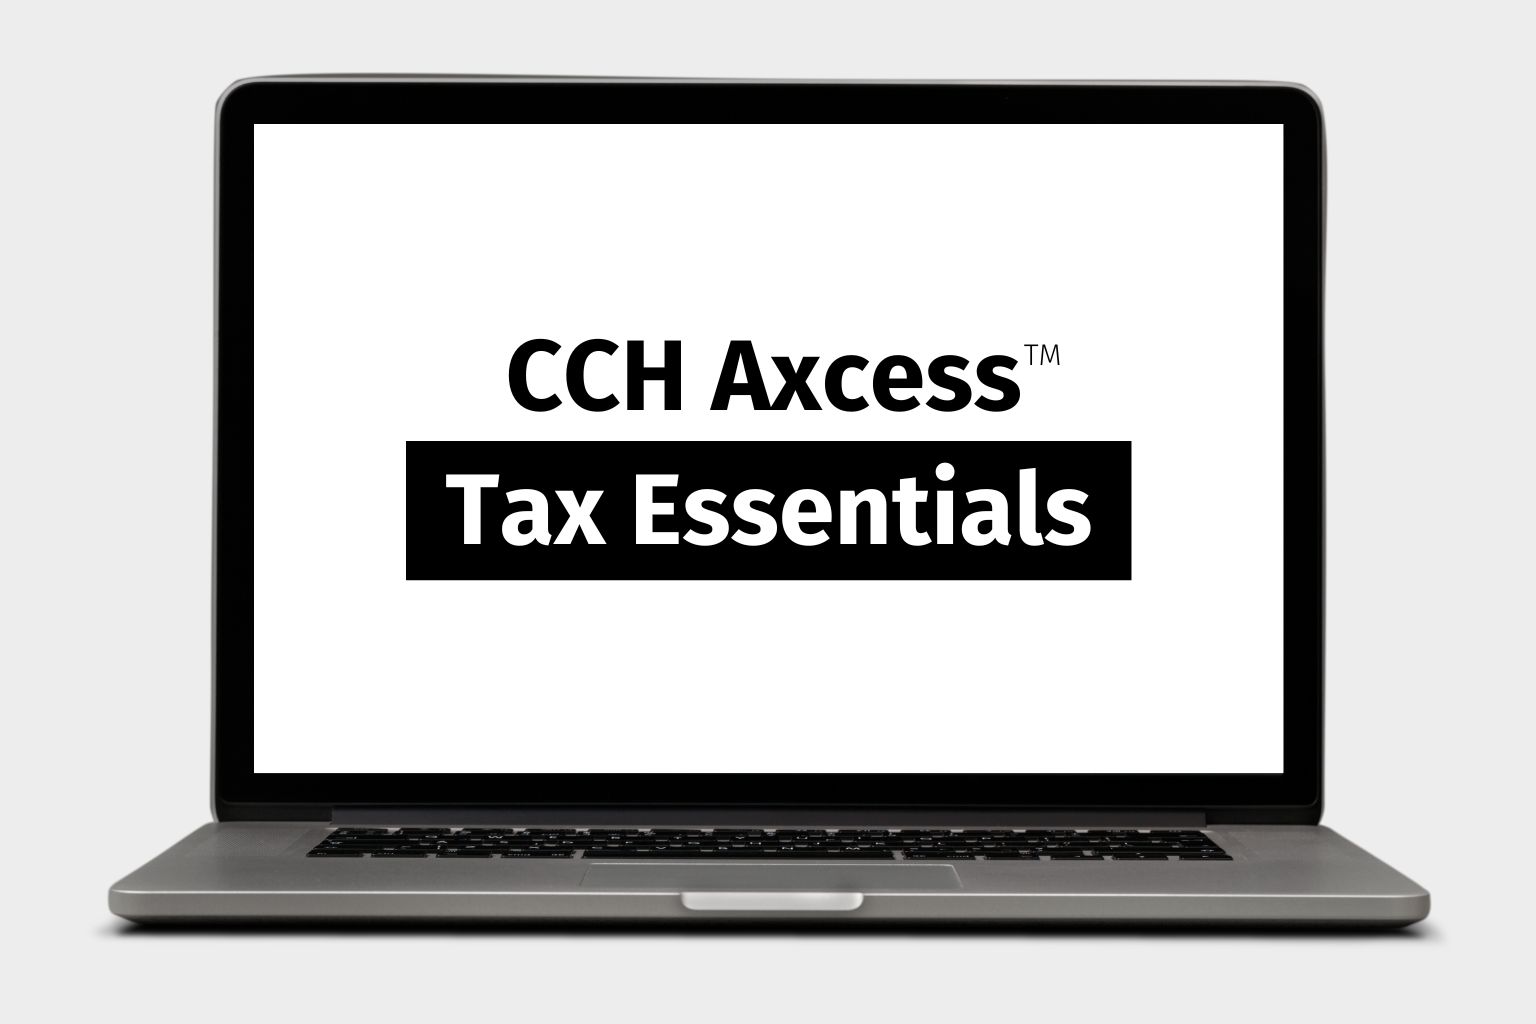 CCH Axcess Tax Essentials Cloud-Based Tax Software